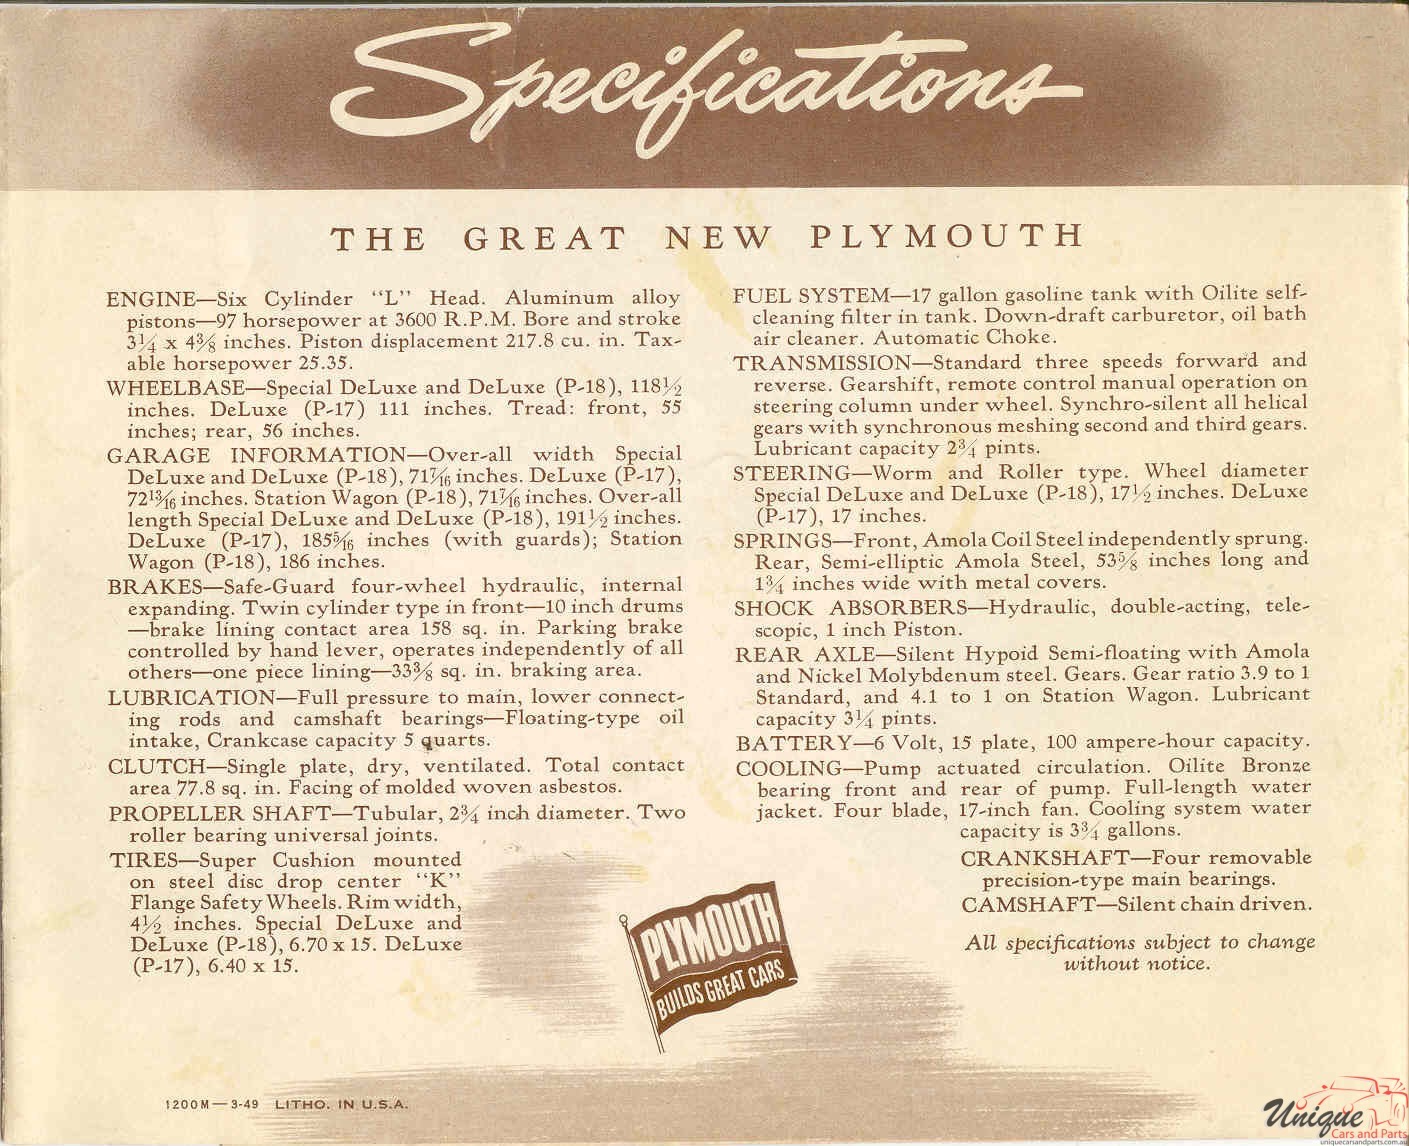 1949 Plymouth Brochure Page 3